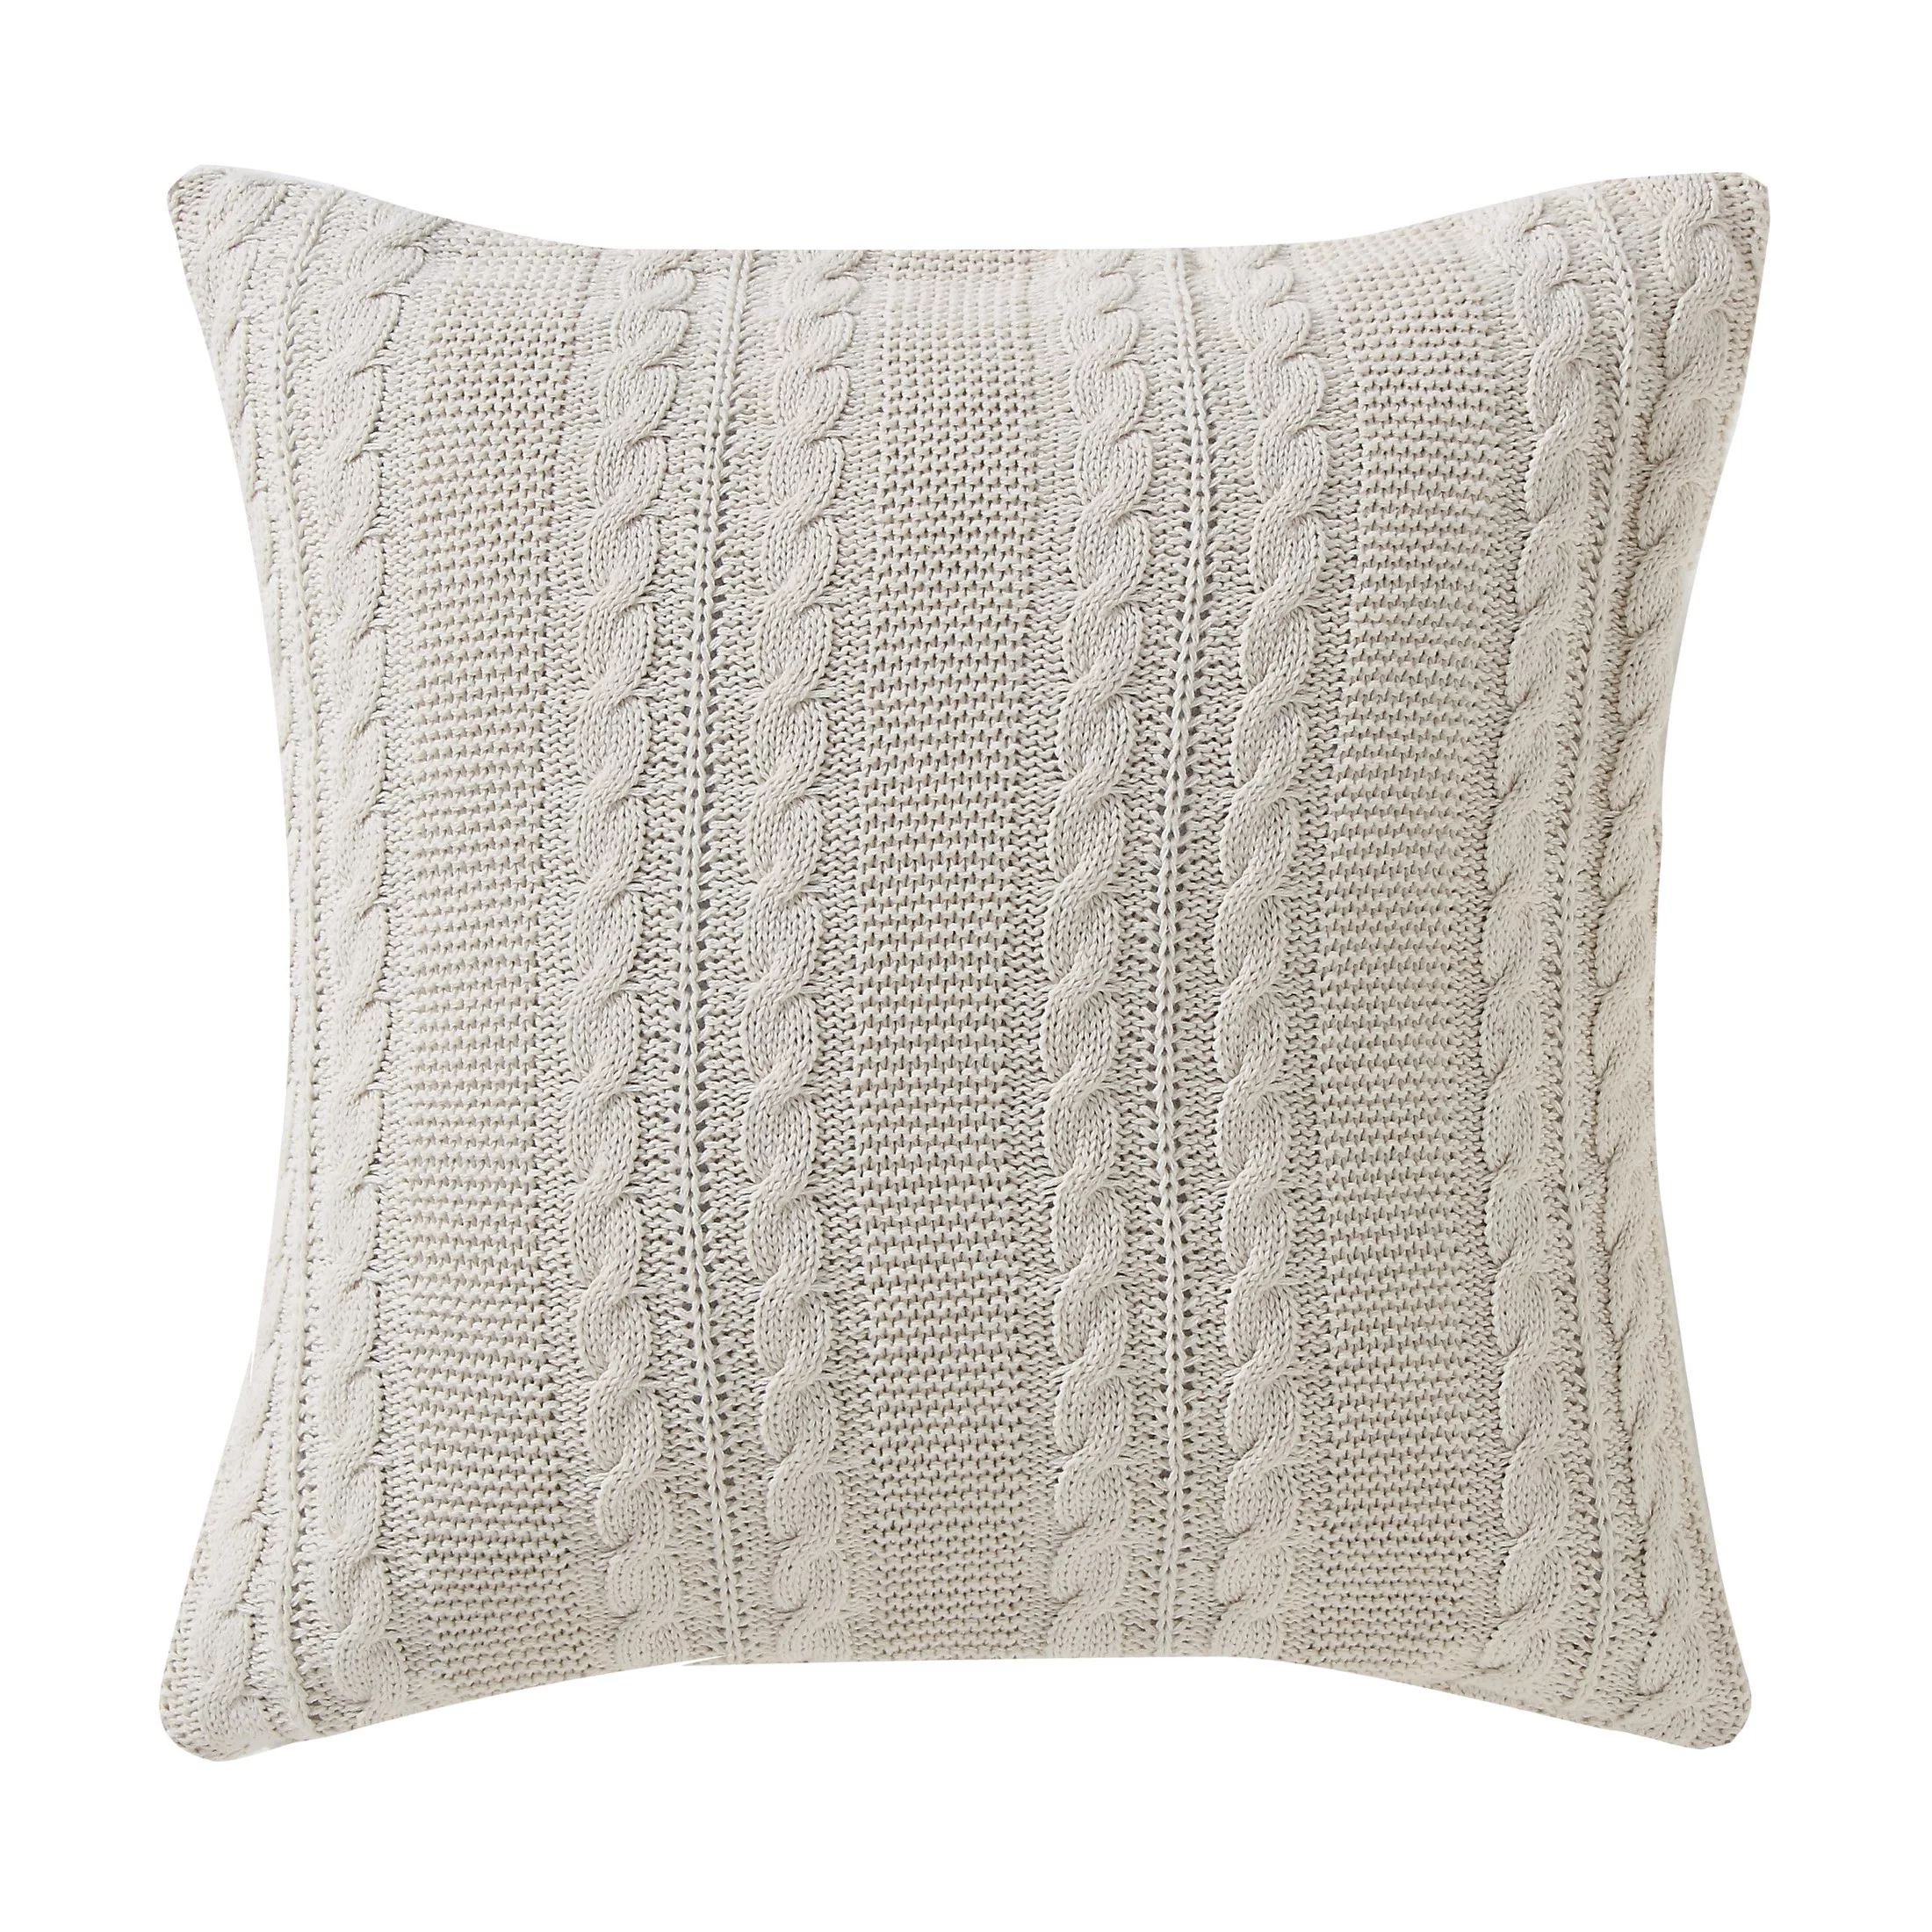 VCNY Home Dublin Cable Knit Square Decorative Throw Pillow, 18" x 18", Ivory | Walmart (US)